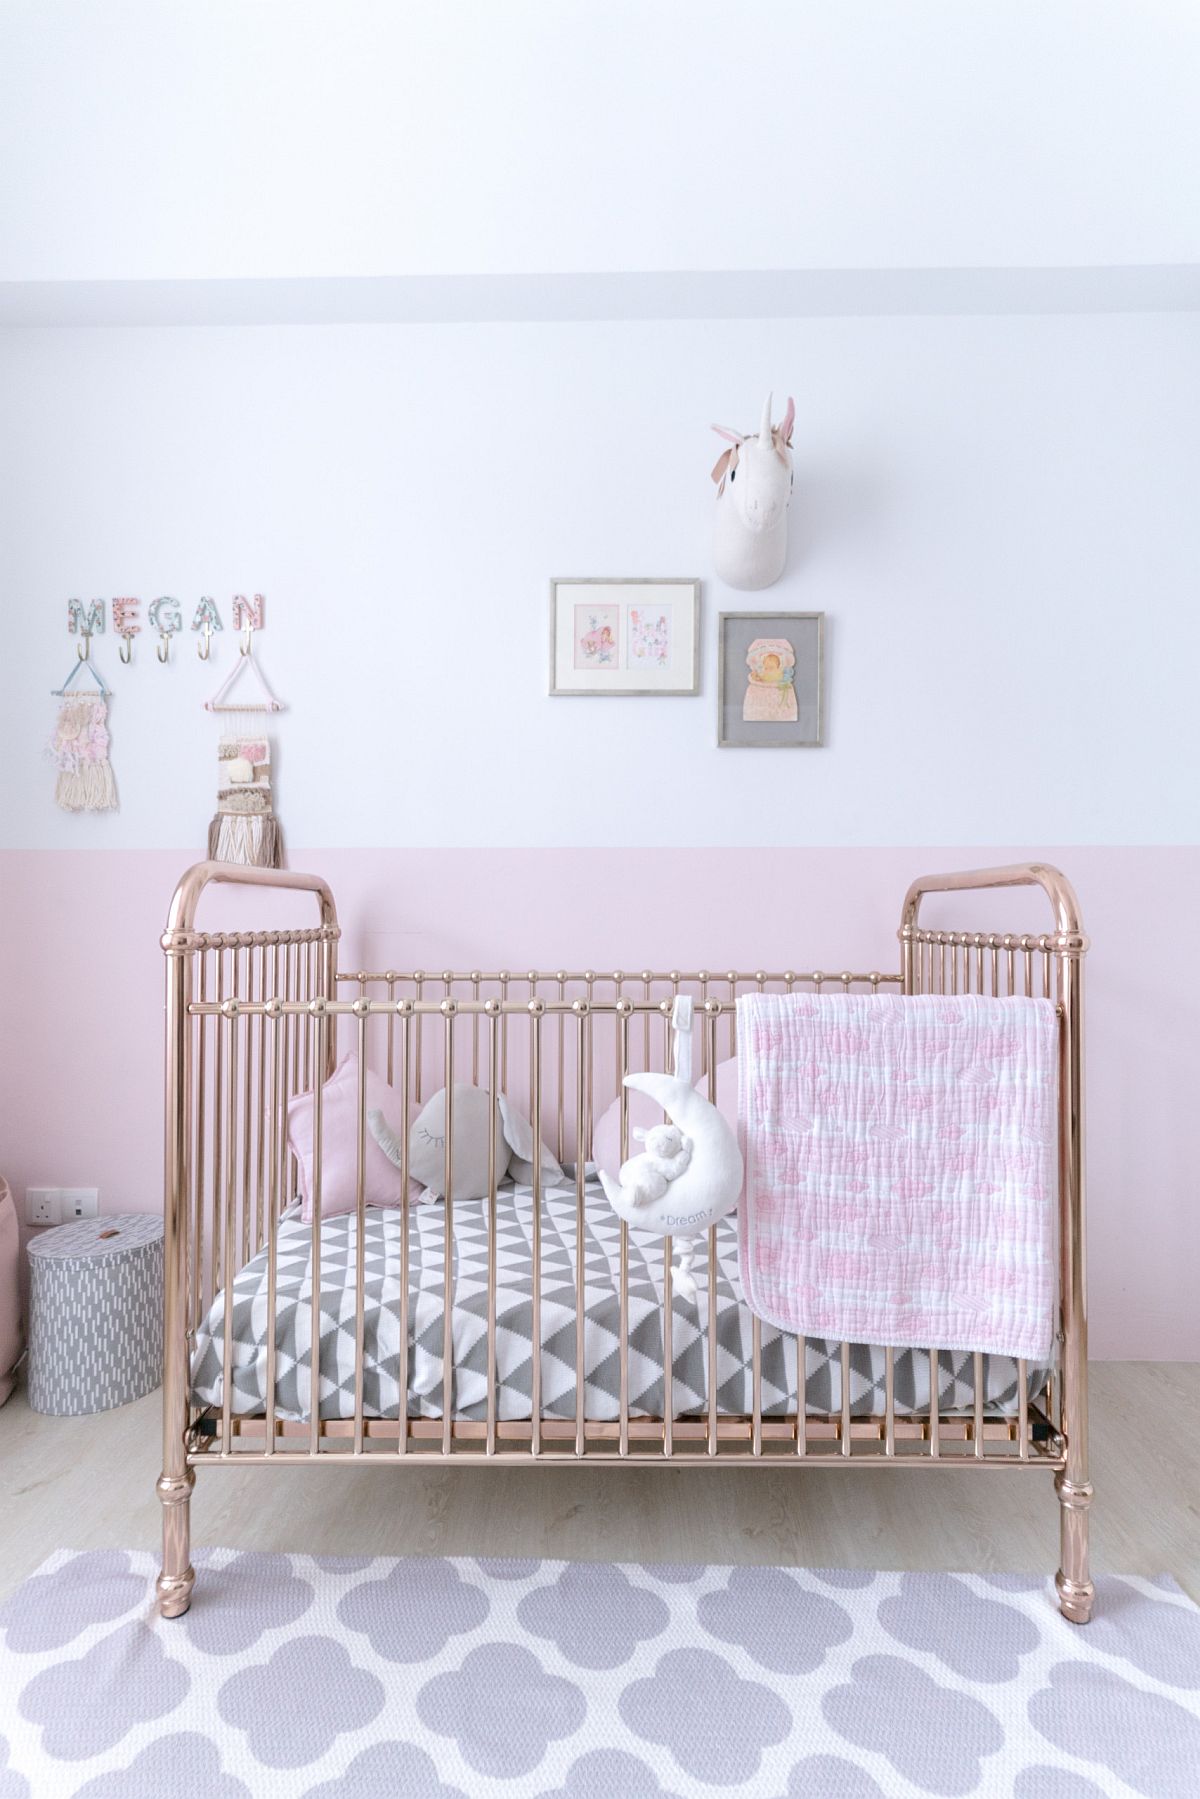 Contemporary-girls-bedroom-in-white-and-pink-with-a-unique-crib-that-has-metallic-finish-36168